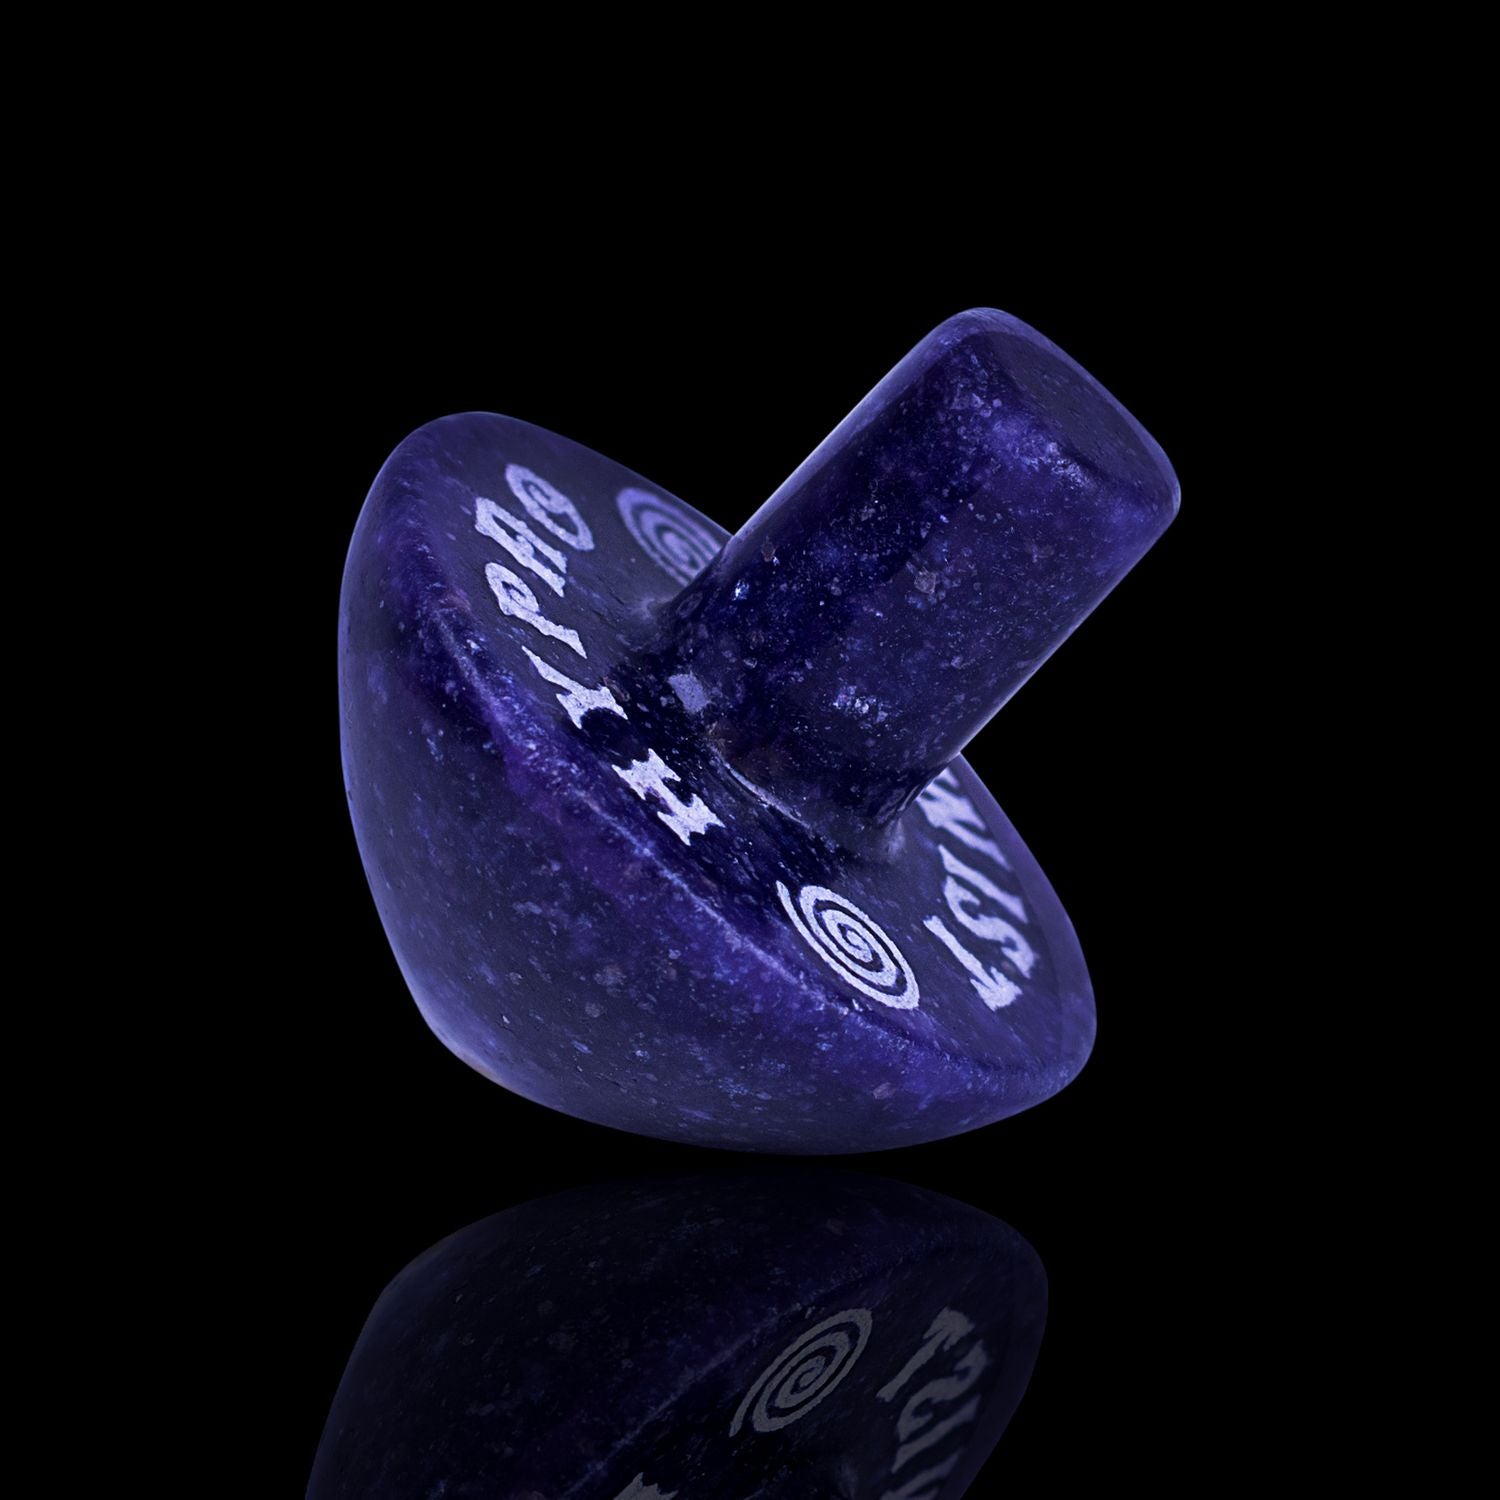 Naturally Wicked Exclusive Hypnotwister. A Lepidolite Jasper Crystal Spinning Top Engraved With Hypno Twist